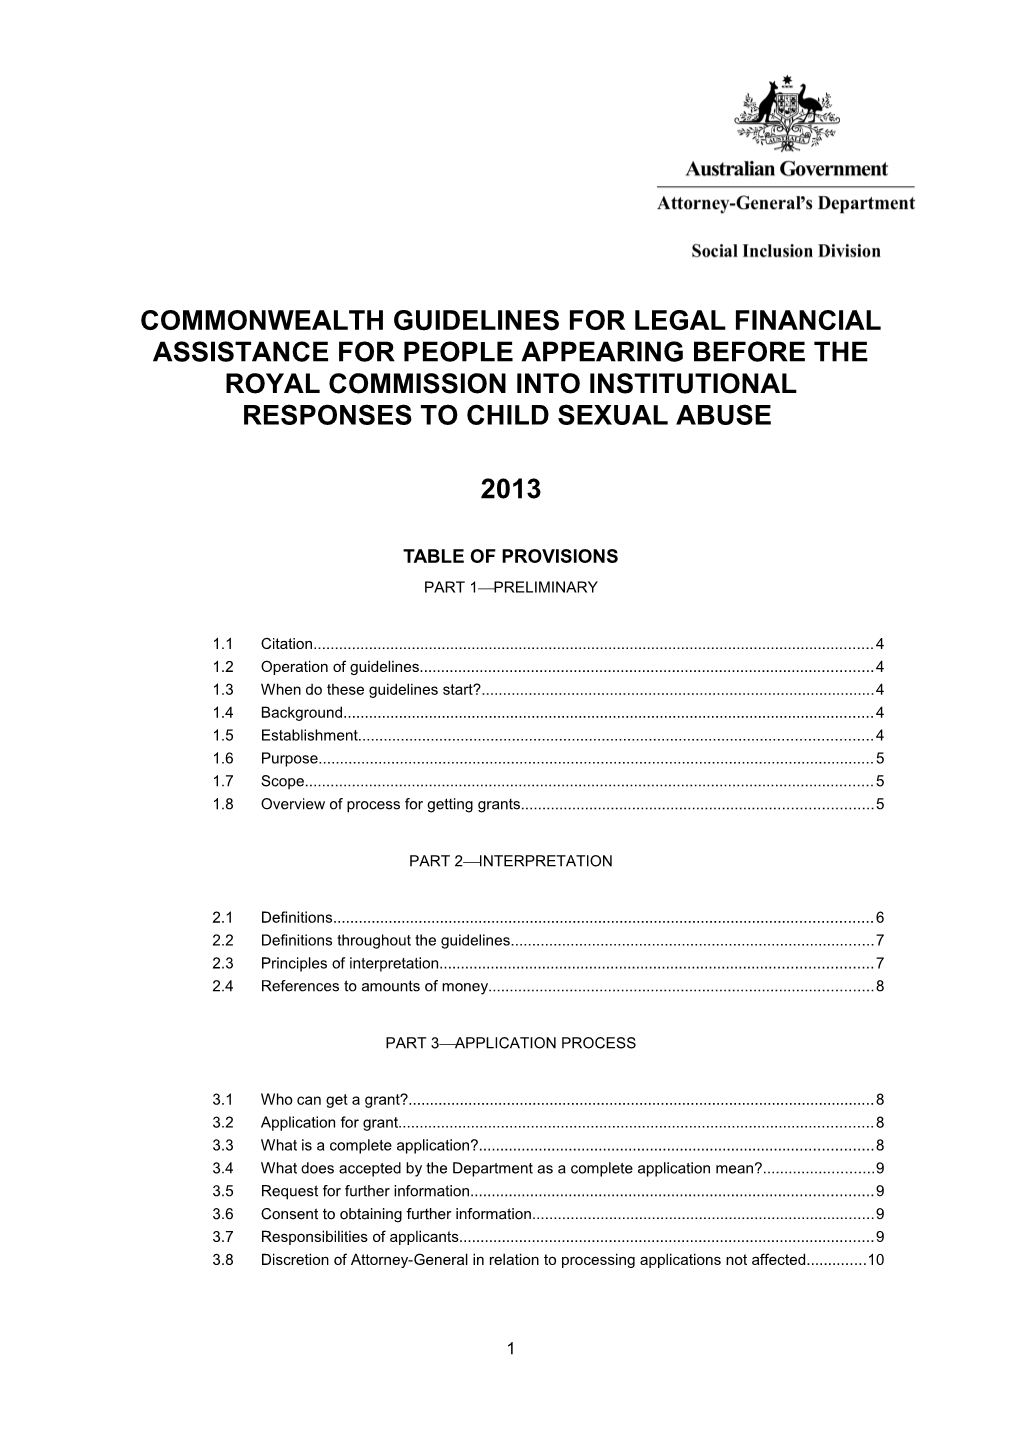 Commonwealth Guidelines for Legal Financial Assistance for Witnesses